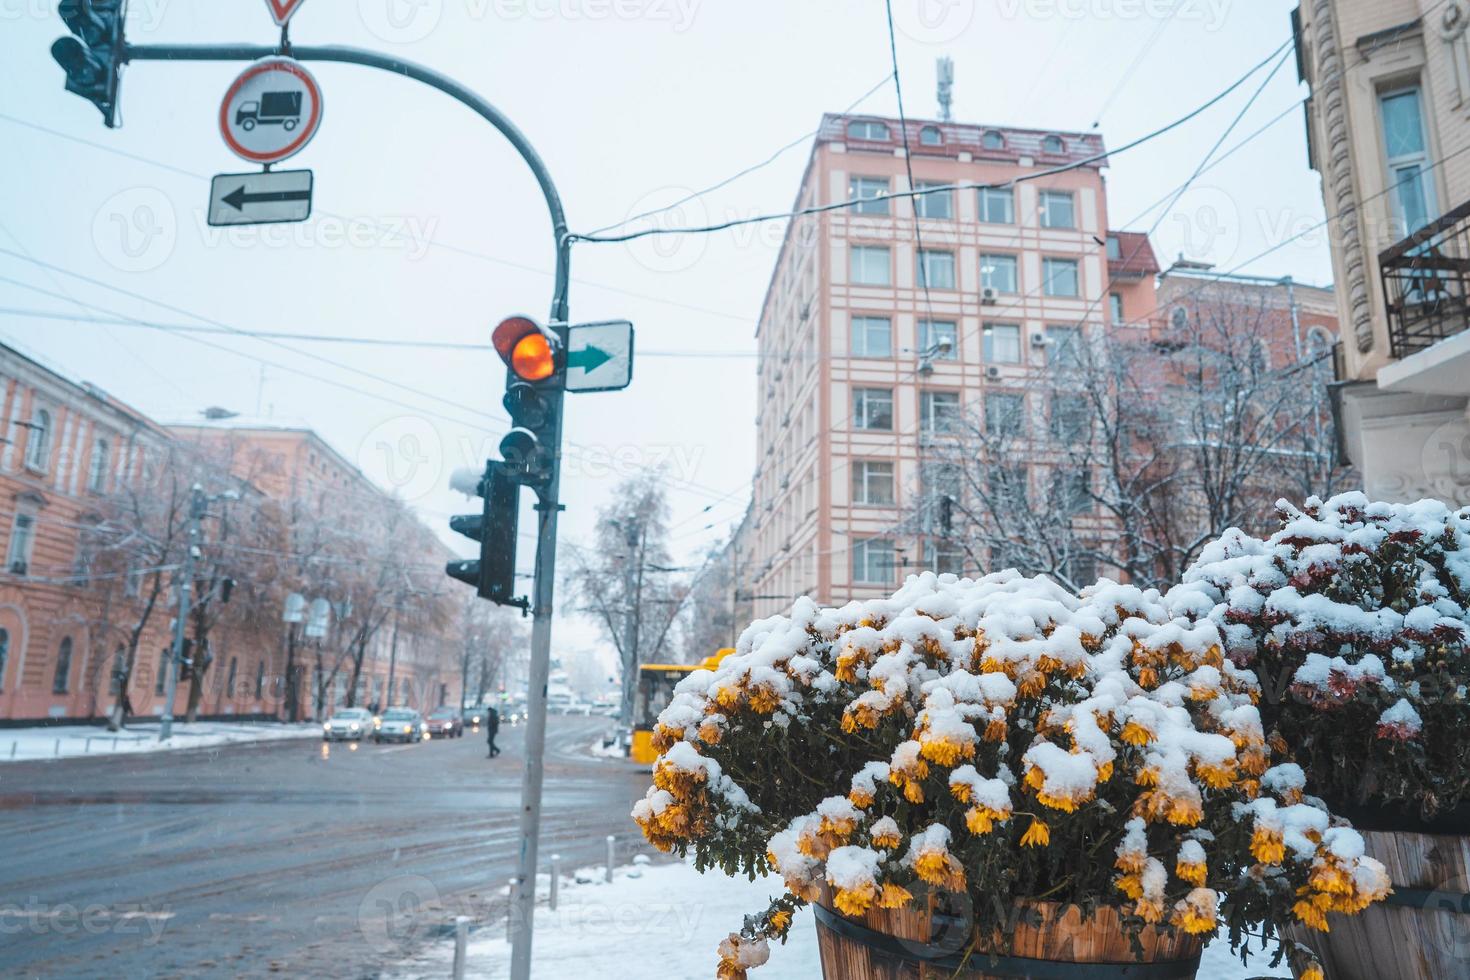 Snow on the flowers in the pot, flower pots on the streets photo